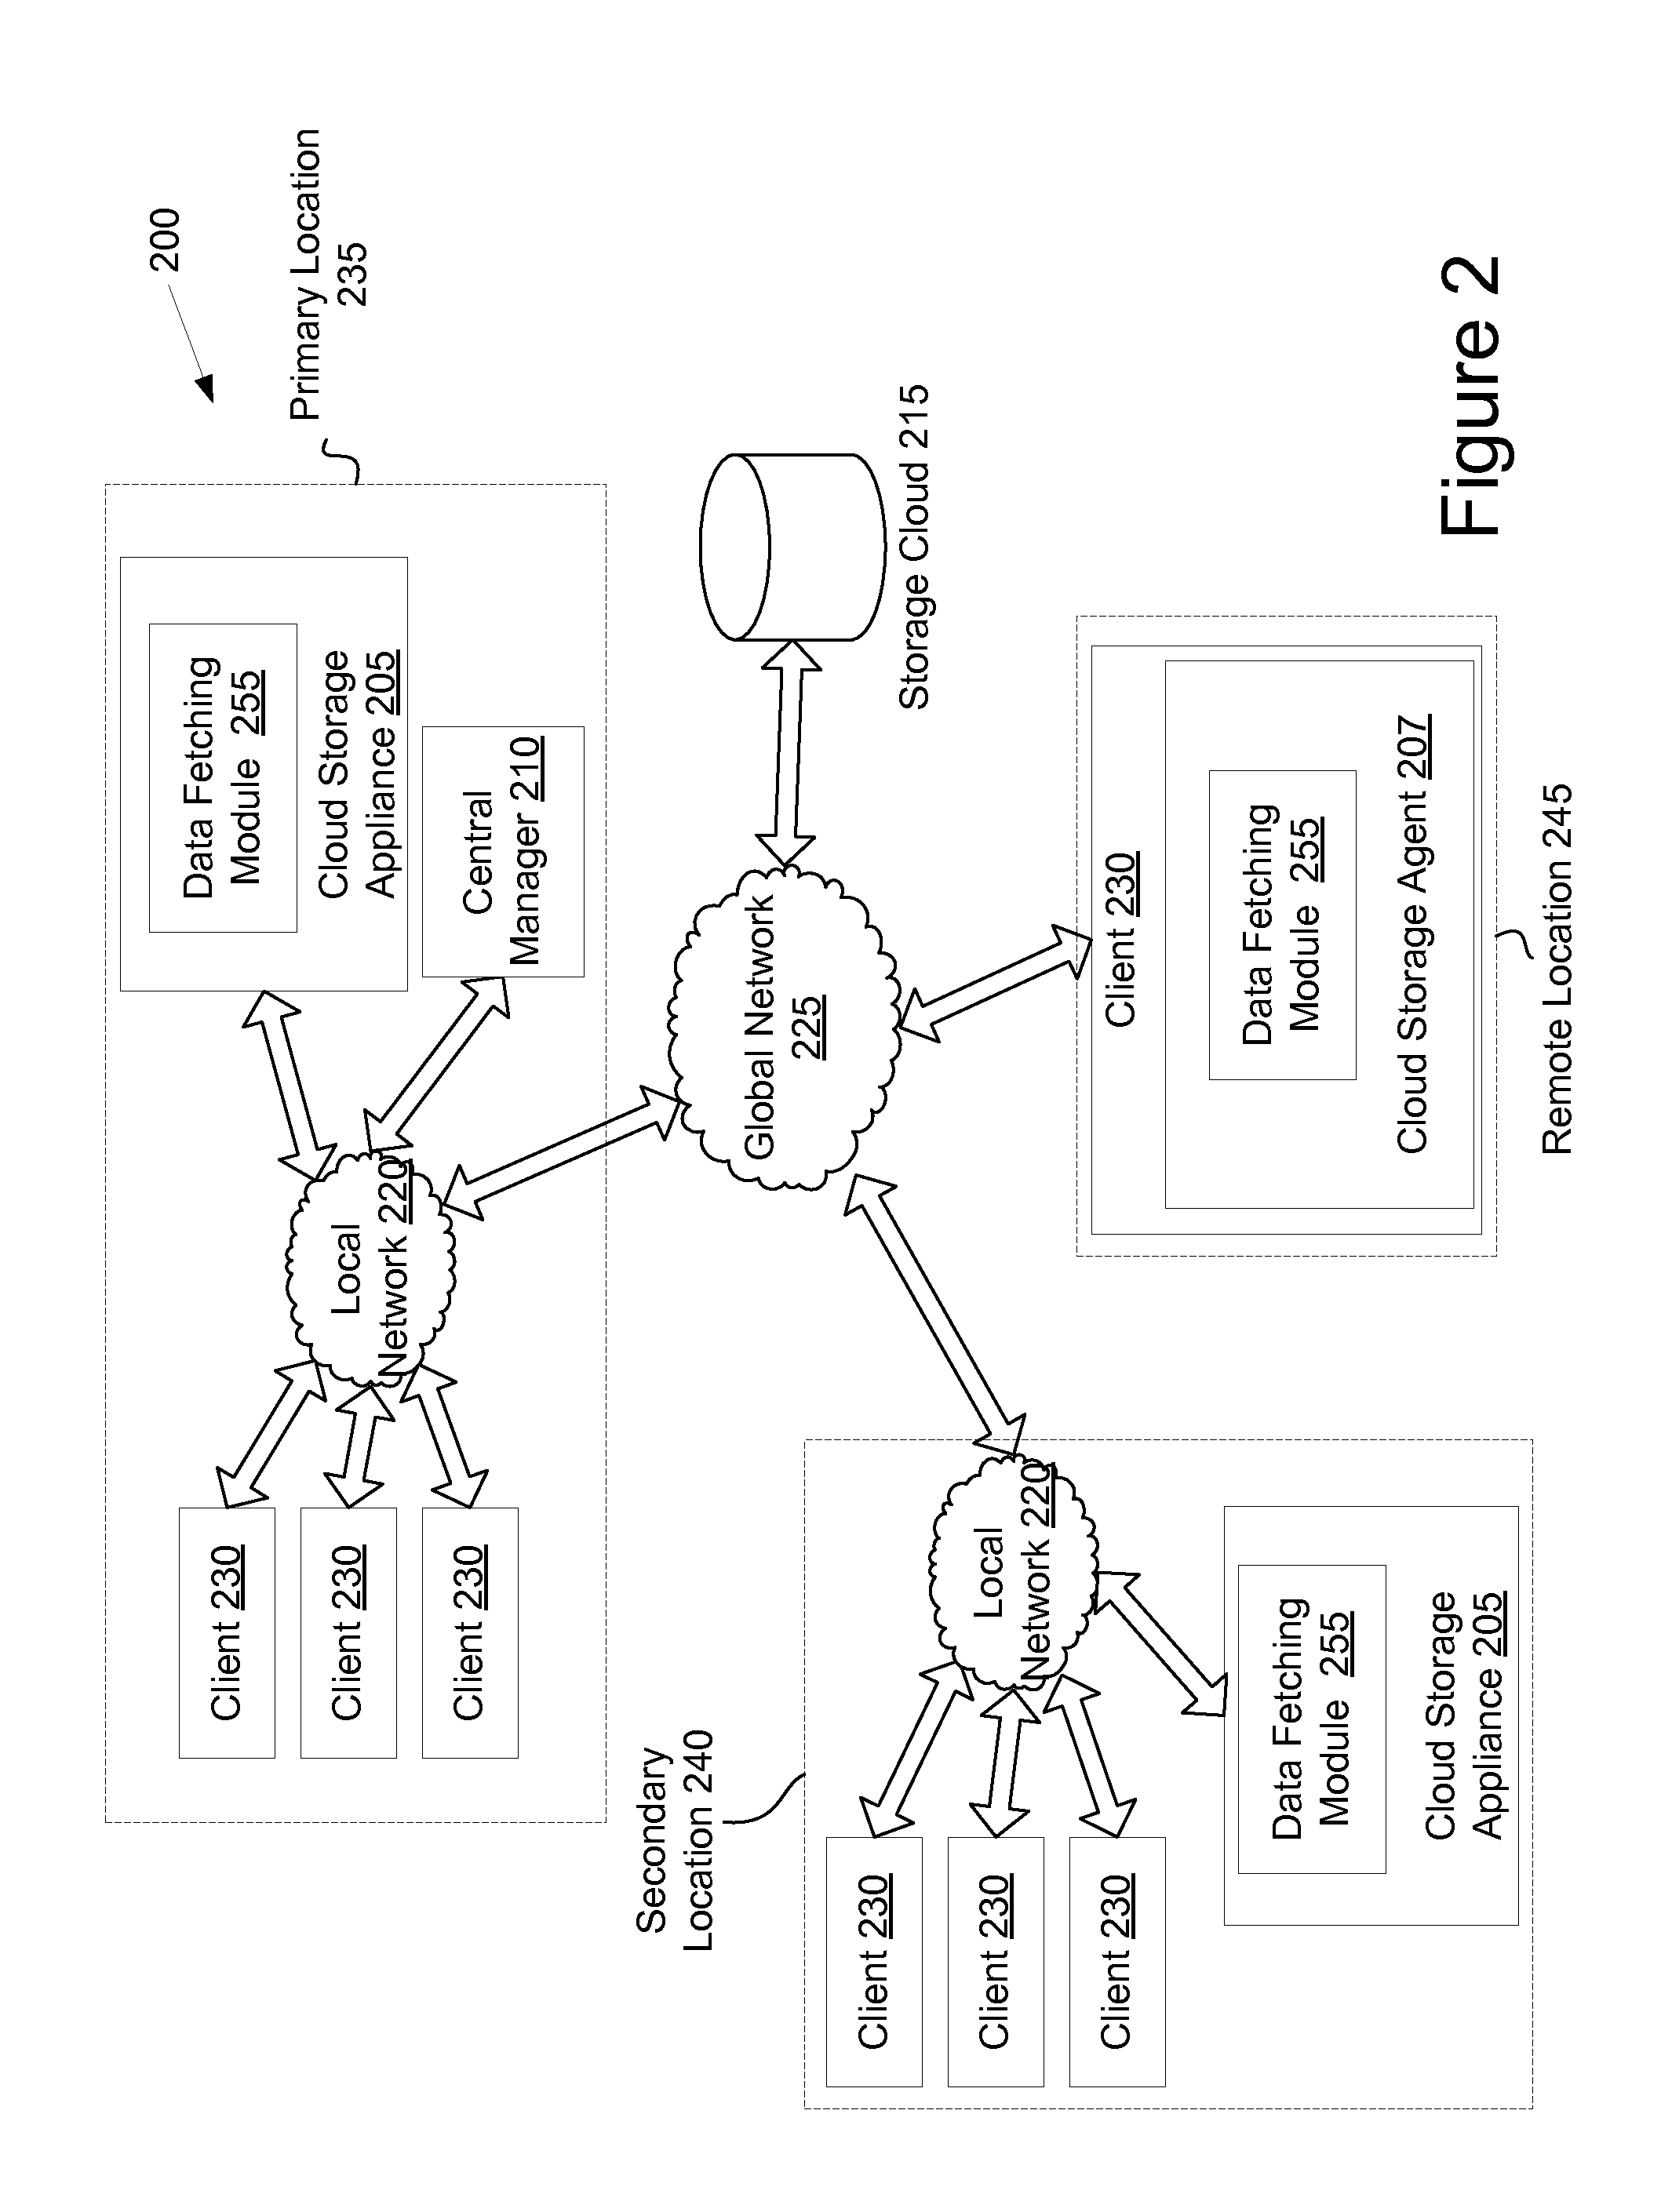 Mechanism for retrieving compressed data from a storage cloud